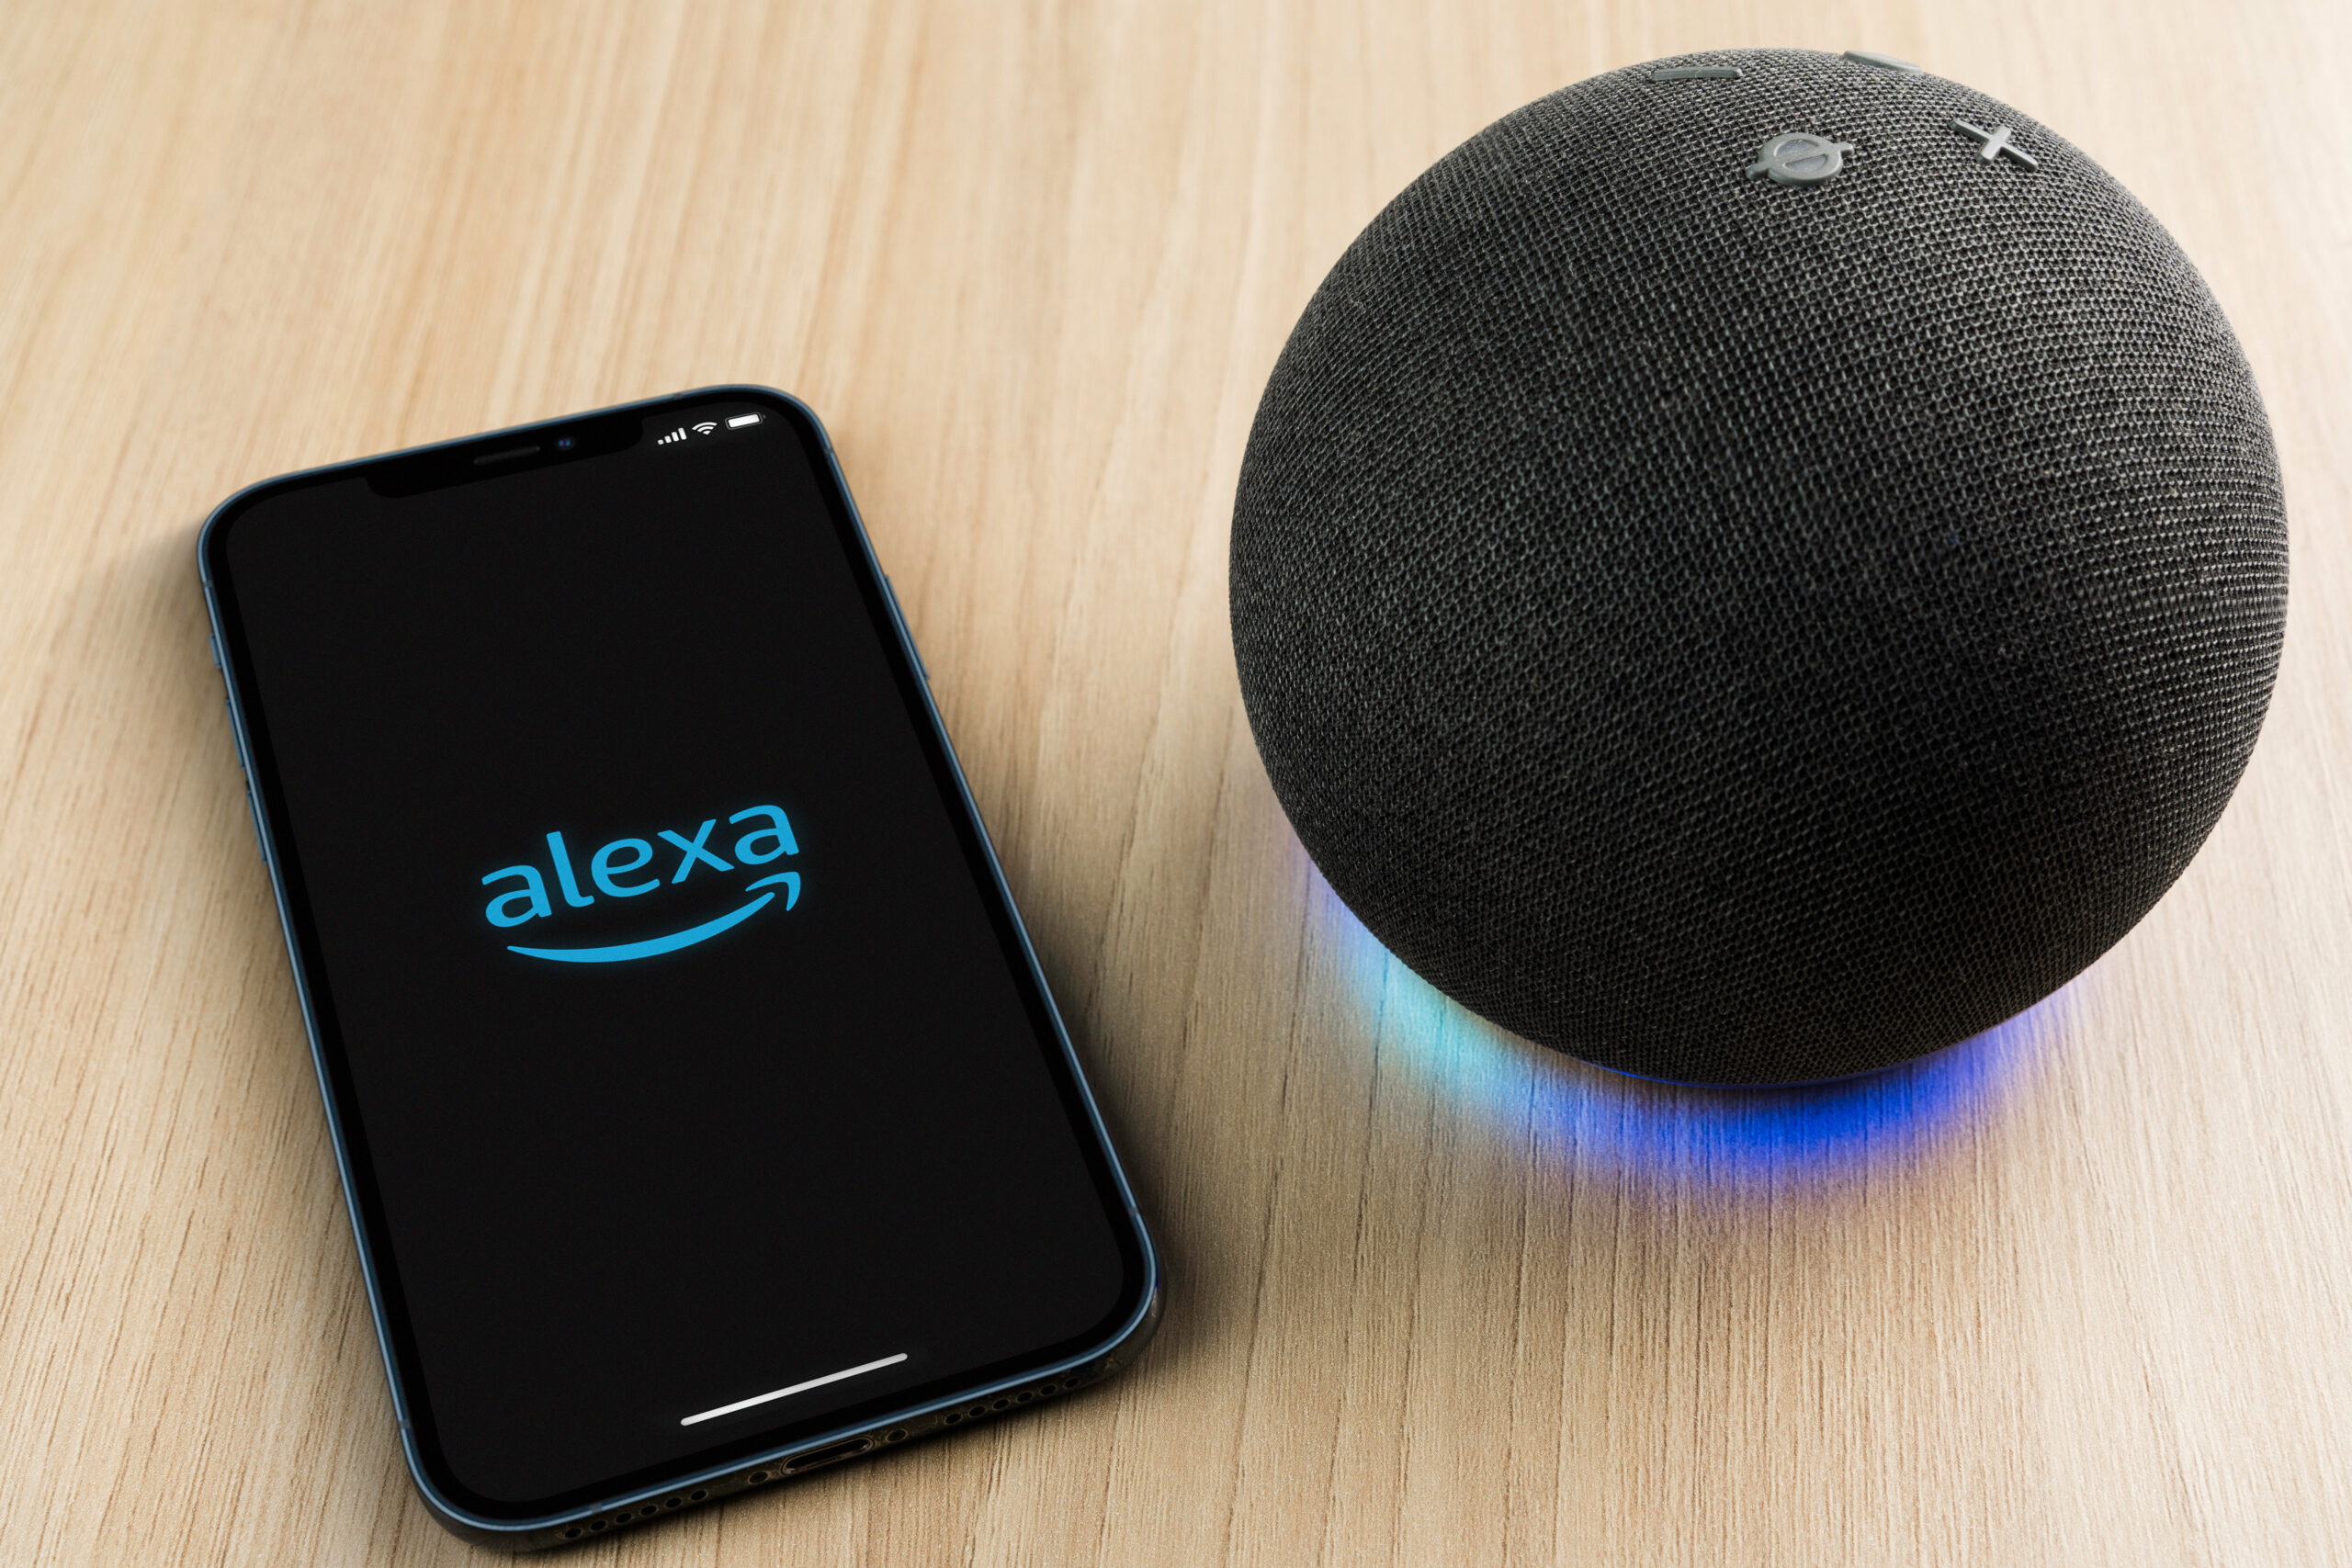 Alexa, Smart speaker and virtual assistant from Amazon company connected to smartphone app. Wooden background.